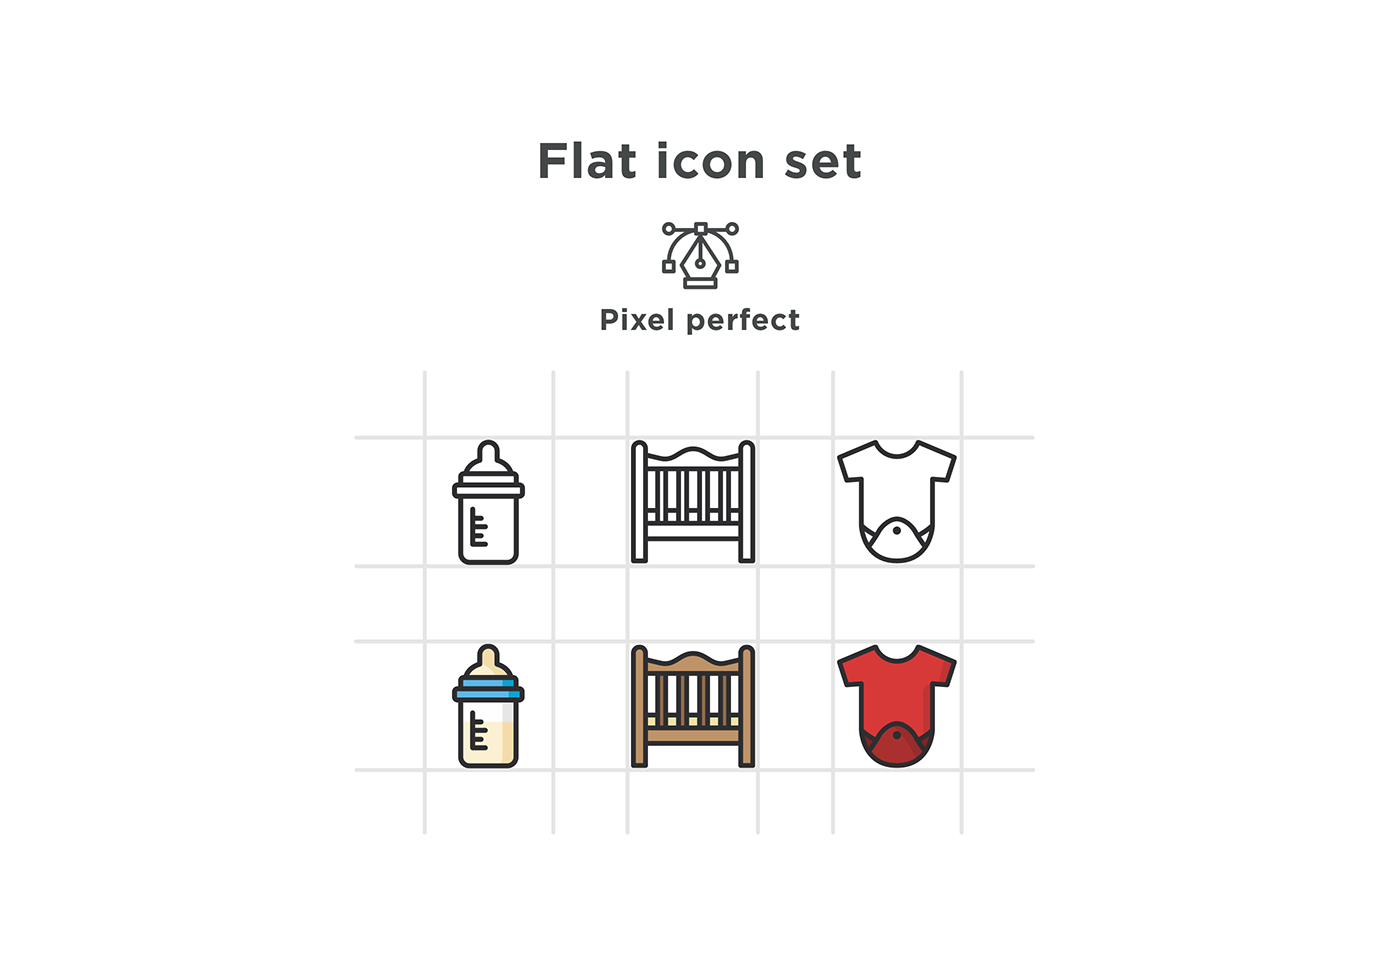 free icons Icon free download flat baby icons baby toy train Pampers